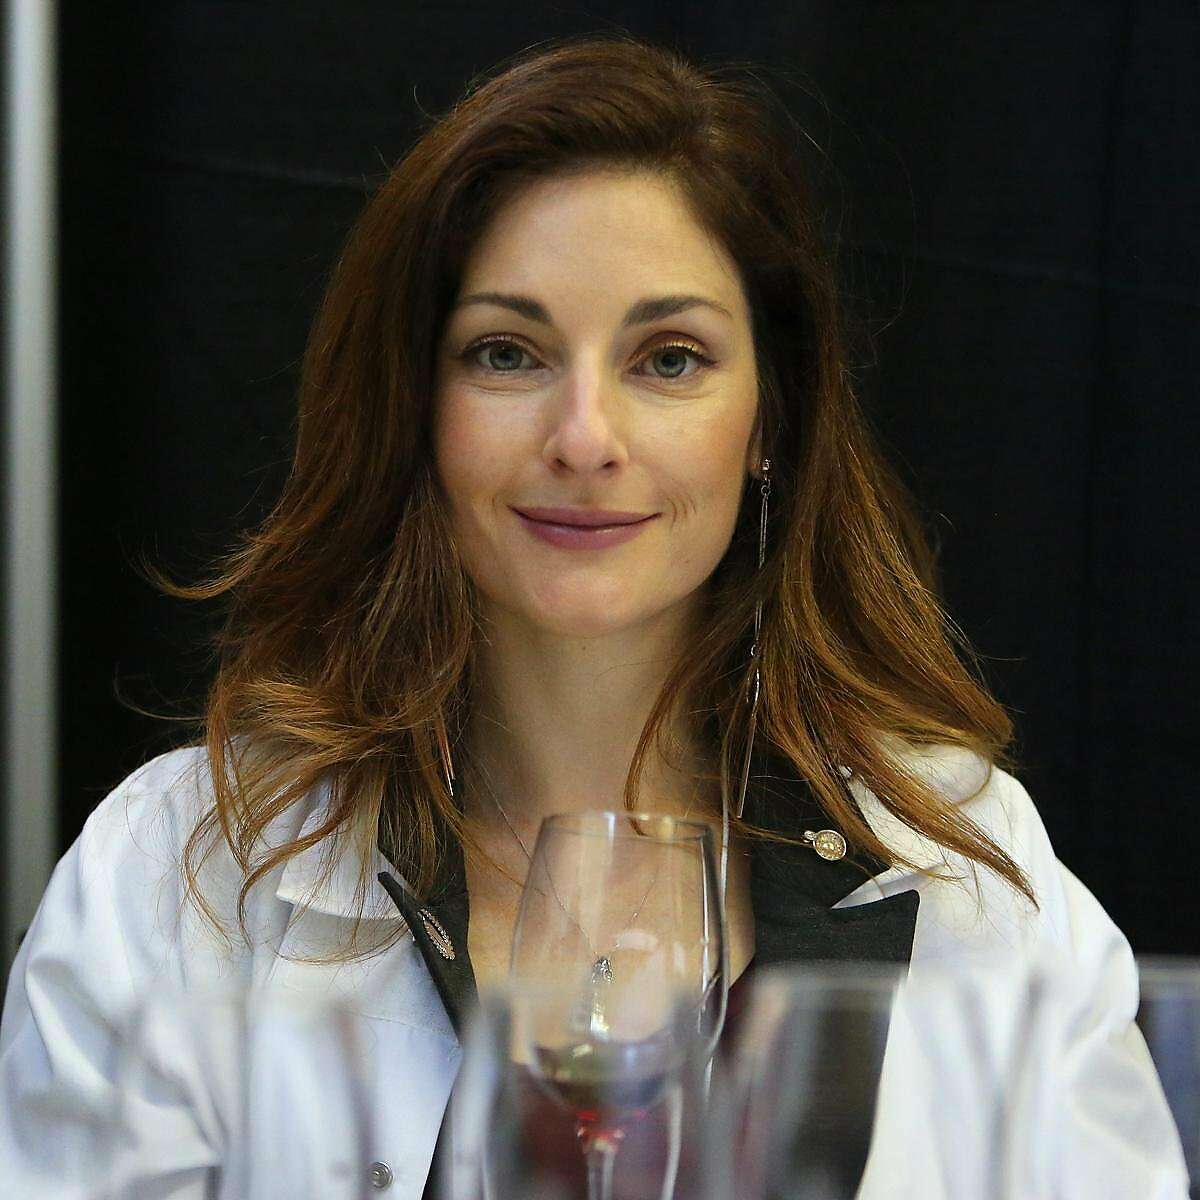 Laura Donadoni, the �Italian Wine Girl,� is a wine journalist and wine educator originally from Bergamo, Italy and now located in Los Angeles, Calif.